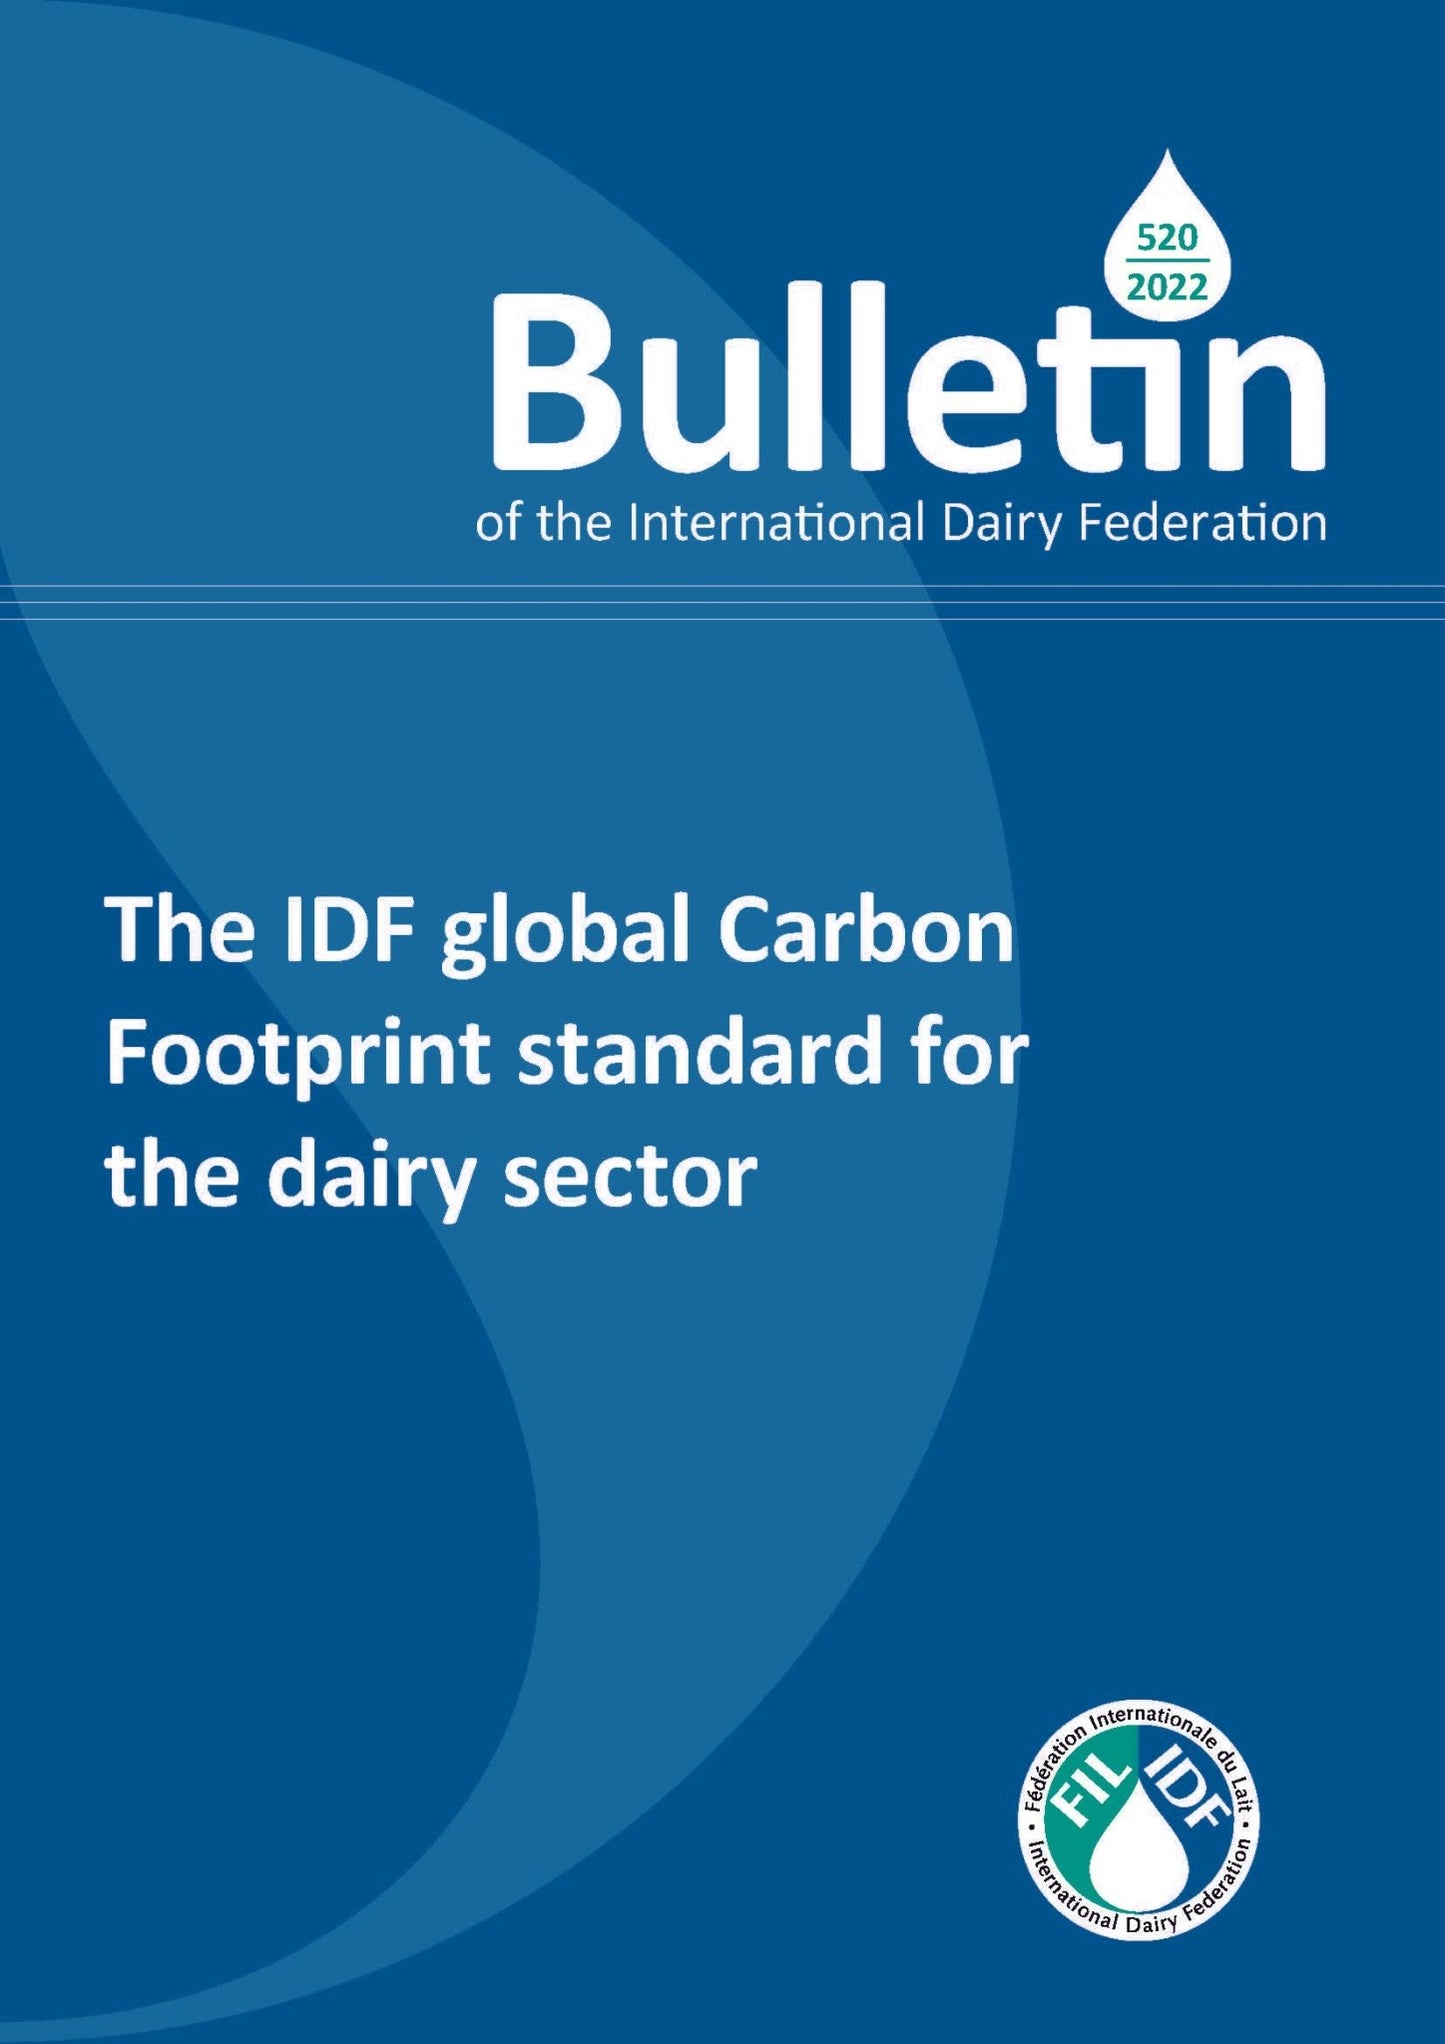 Bulletin of the IDF N°520/2022: The IDF global Carbon Footprint standard for the dairy sector - FIL-IDF